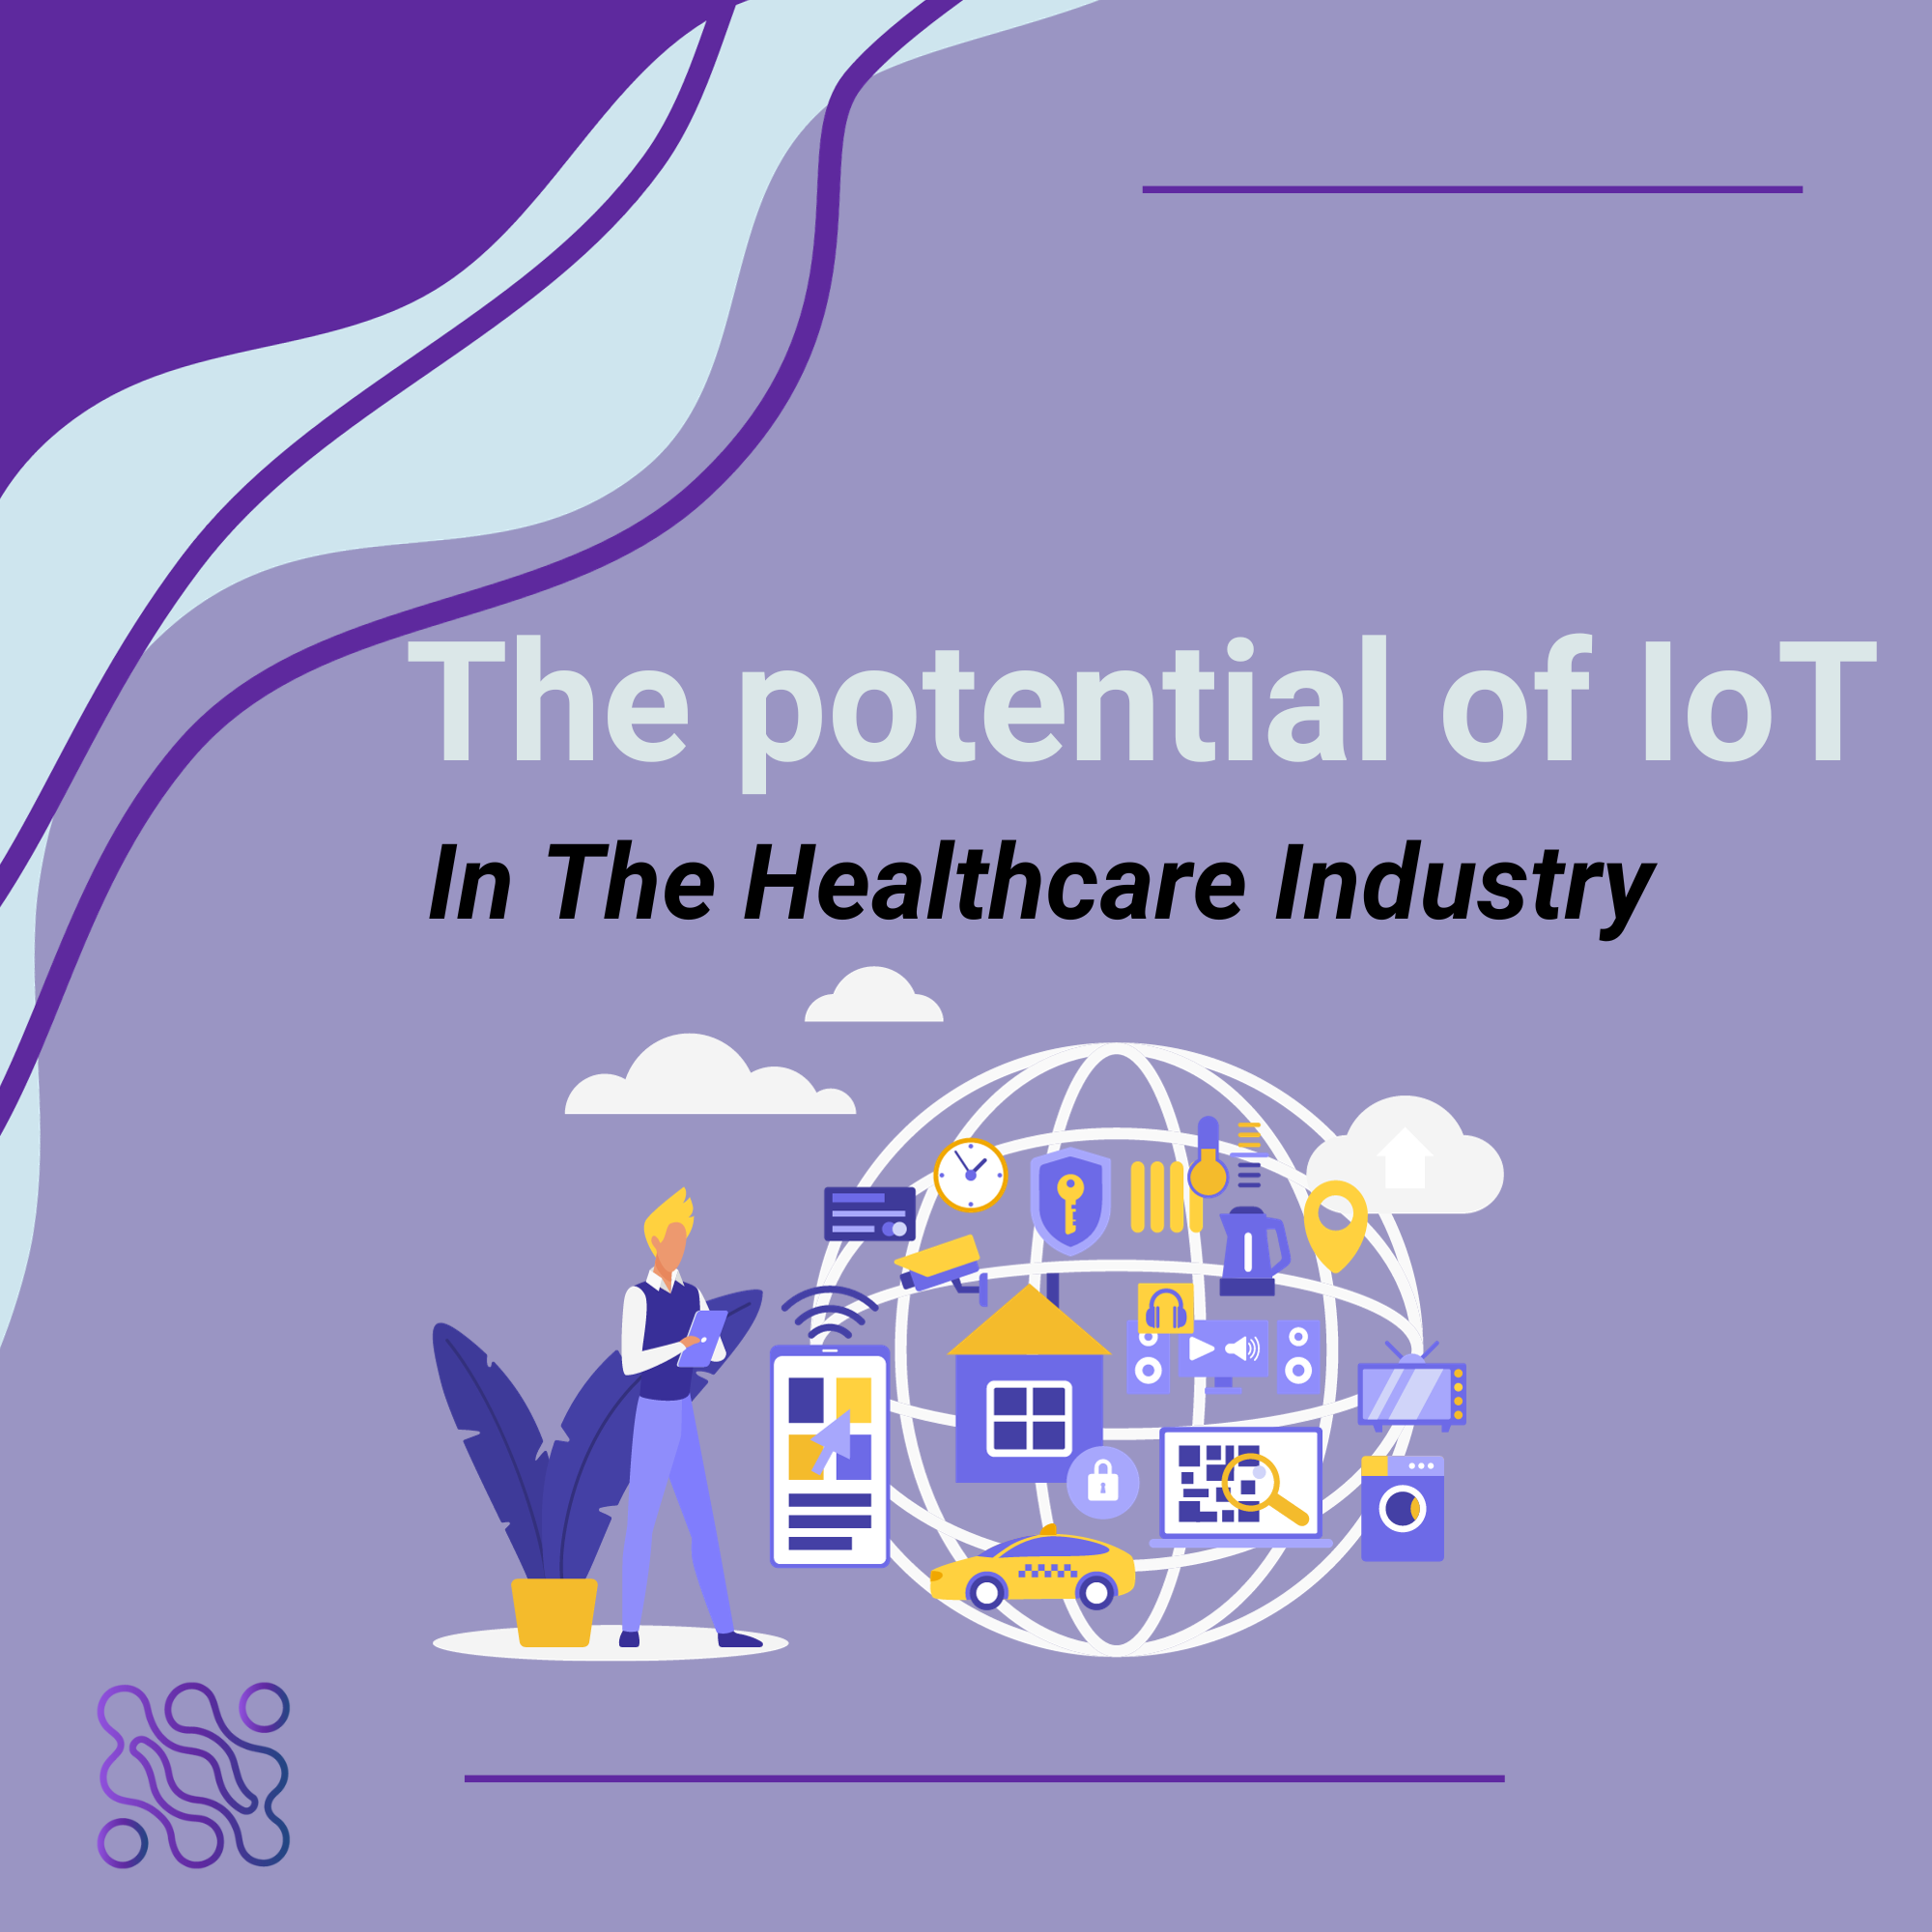 The potential of IoT in the Healthcare industry